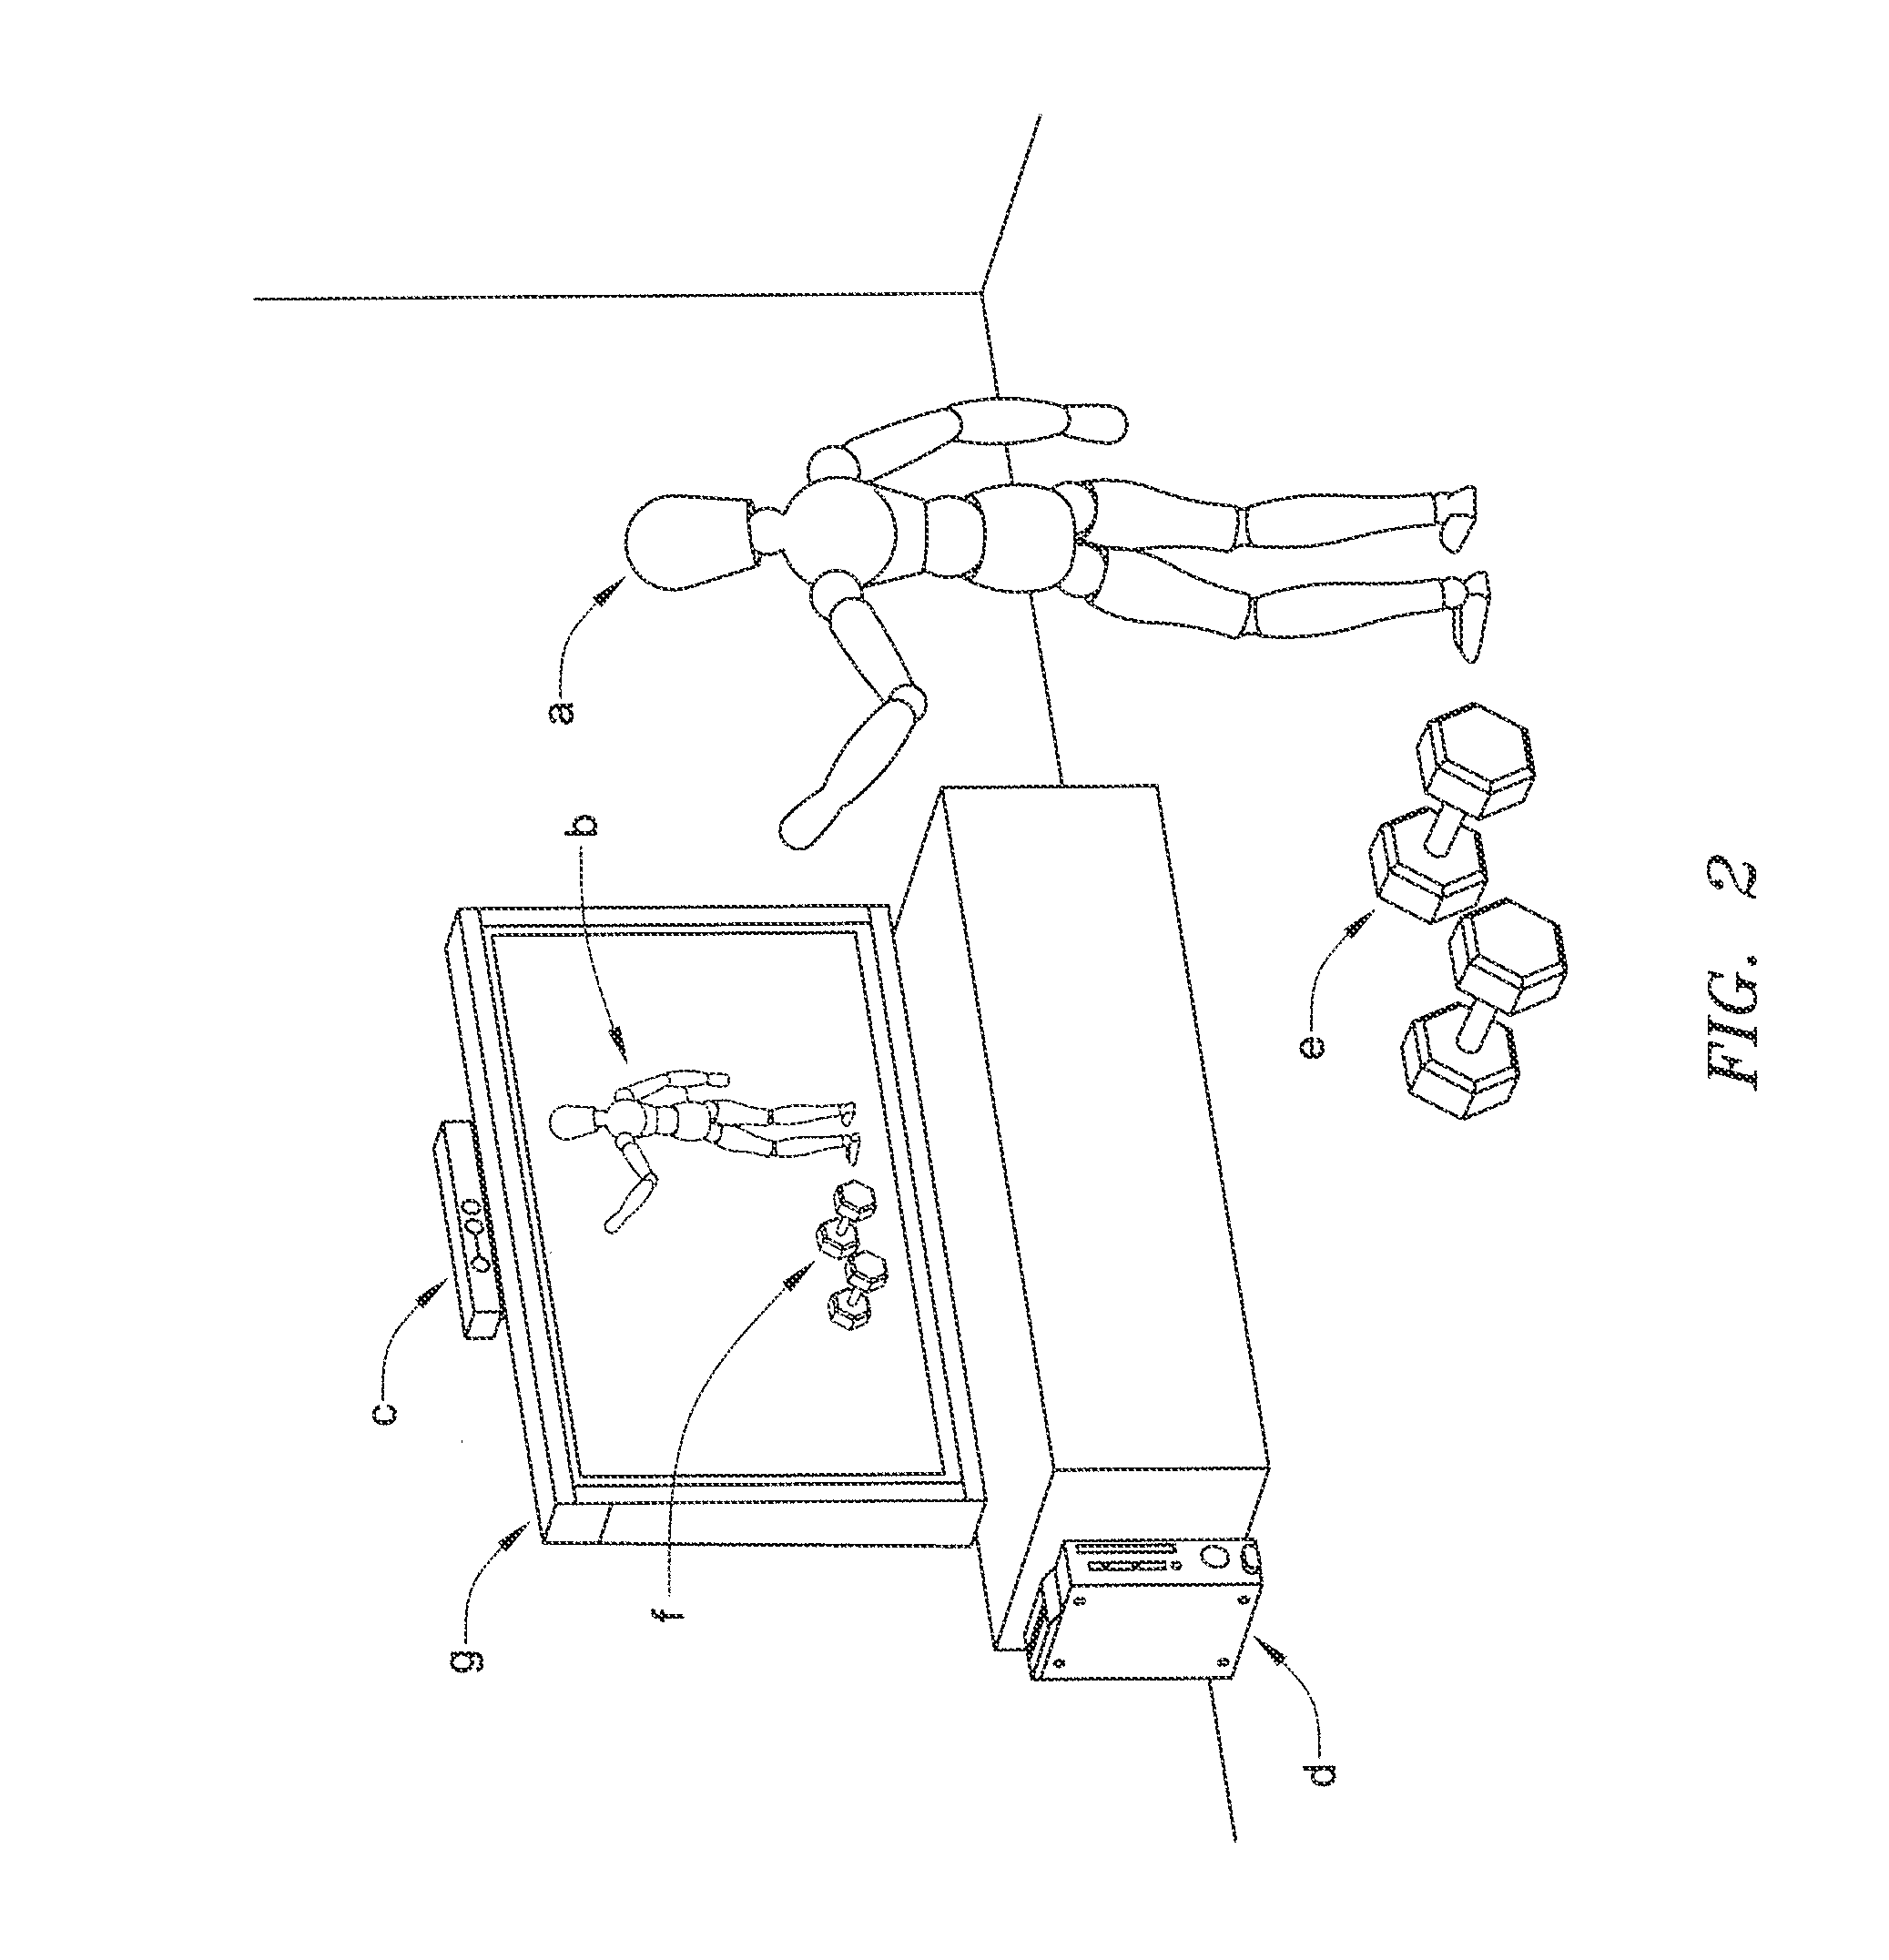 Systems, apparatus and methods for non-invasive motion tracking to augment patient administered physical rehabilitation